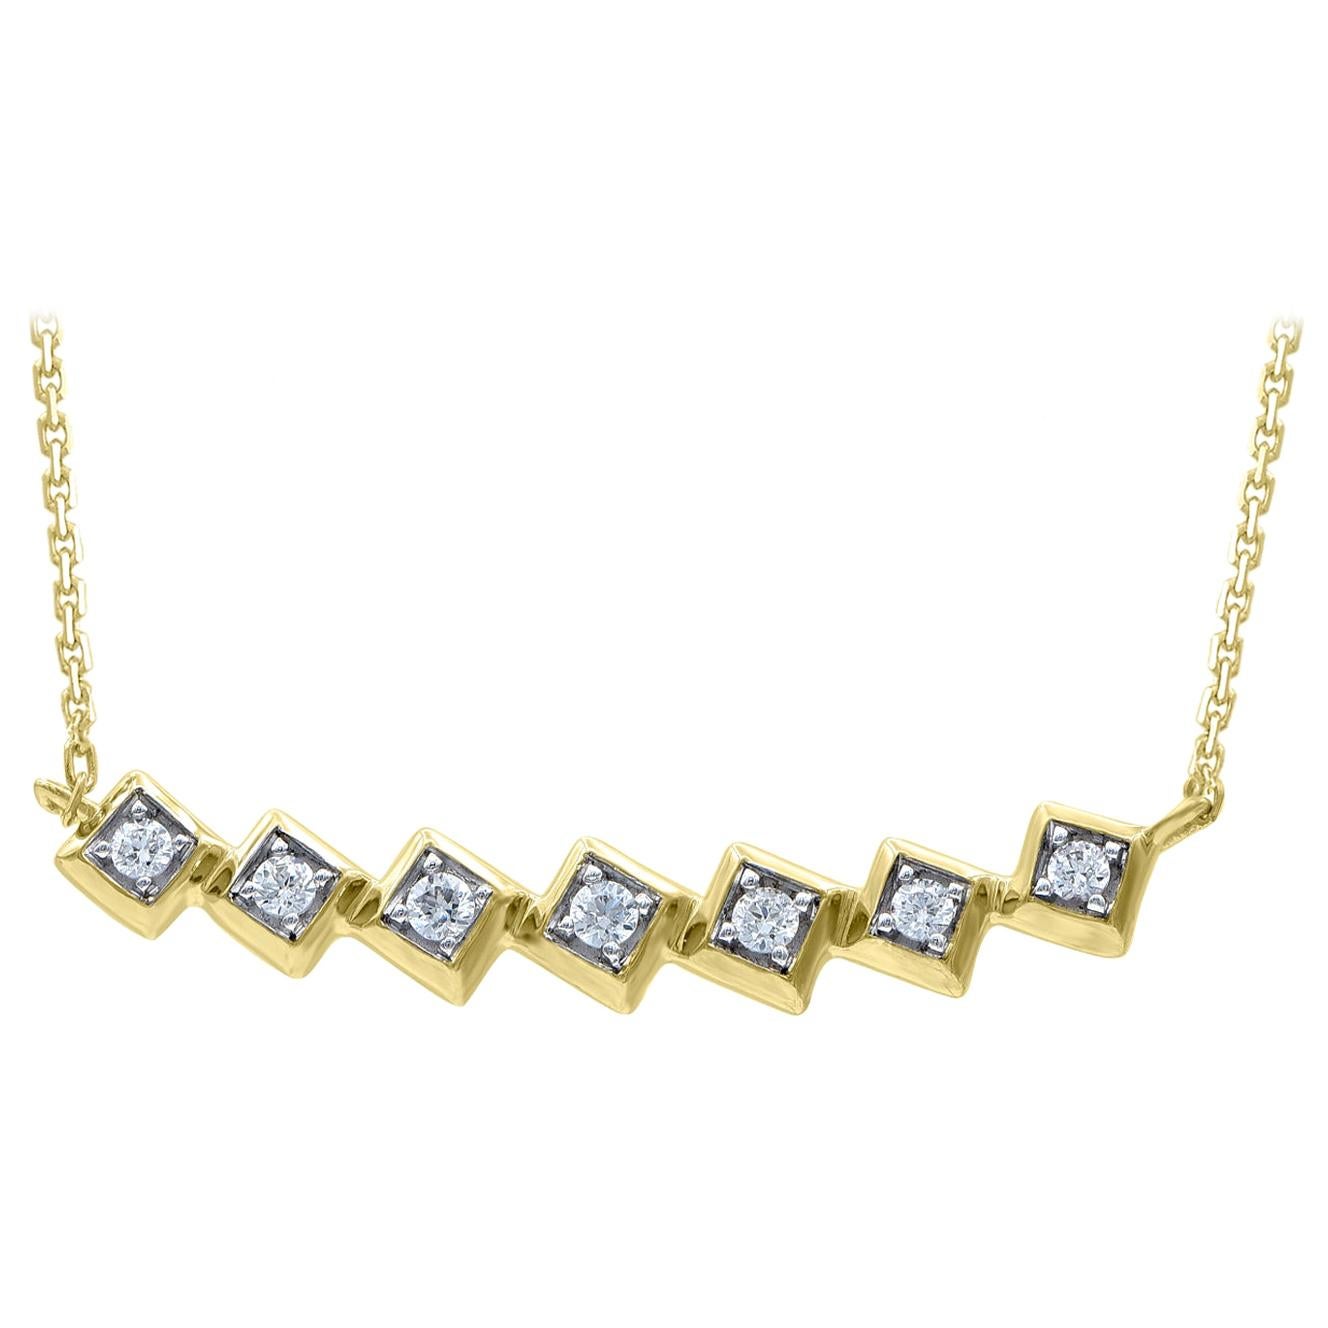 TJD 0.15 Carat Round Diamond 14 Kt Yellow Gold Square Textured Fashion Necklace For Sale